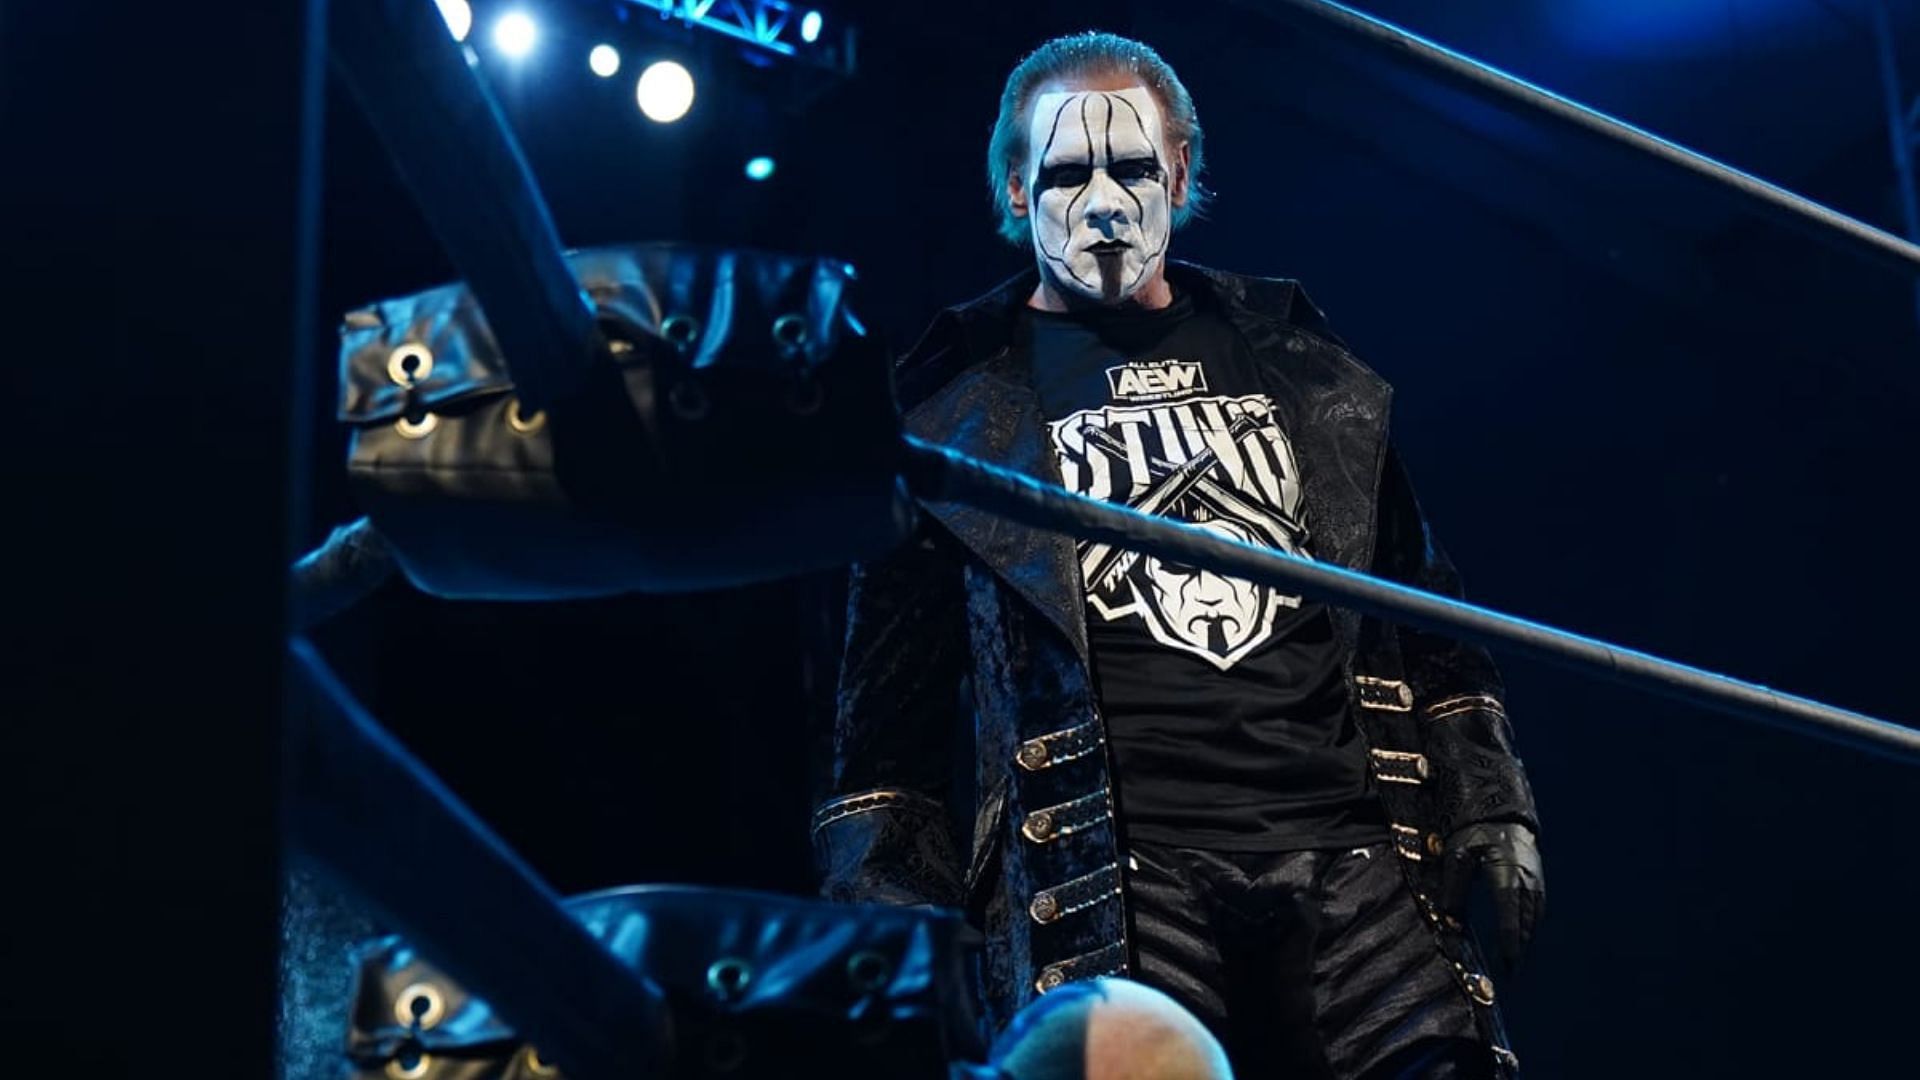 Sting is set to retire soon in AEW